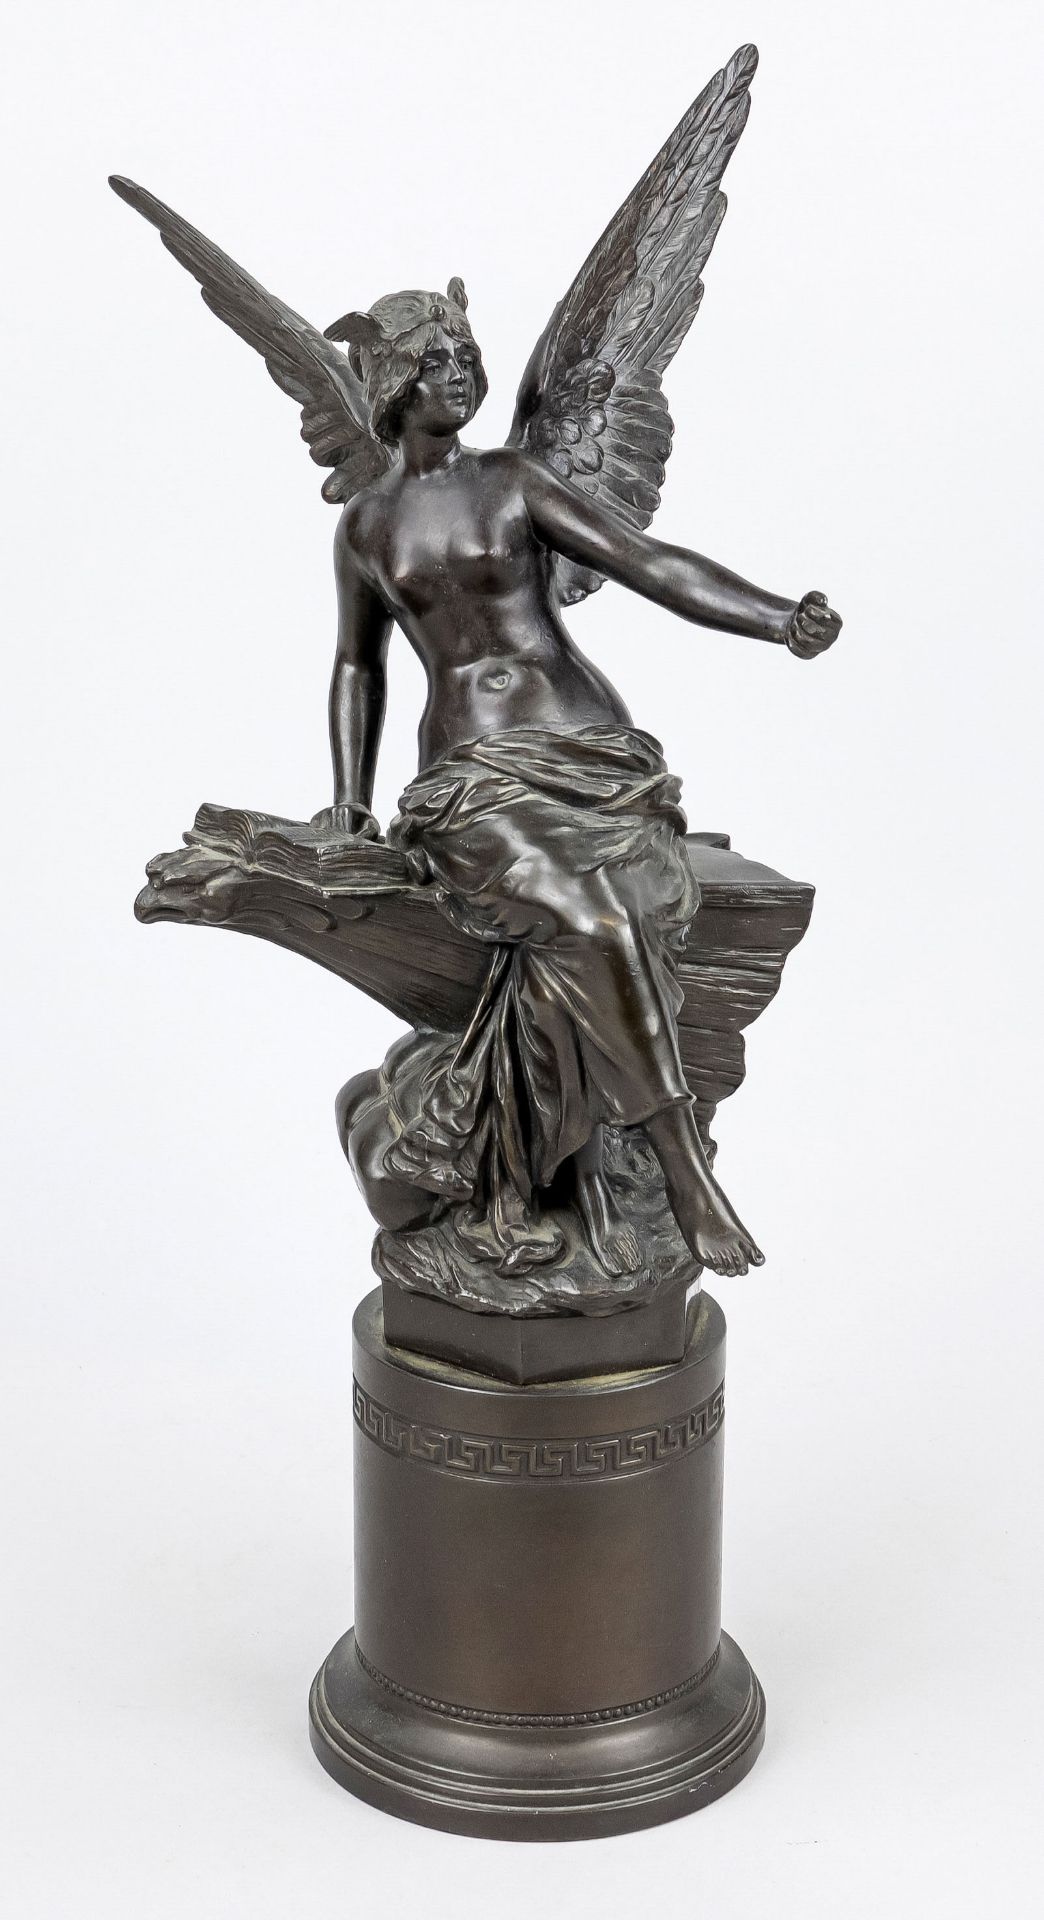 French sculptor late 19th c., allegorical figure in the form of a female angel with a book on the